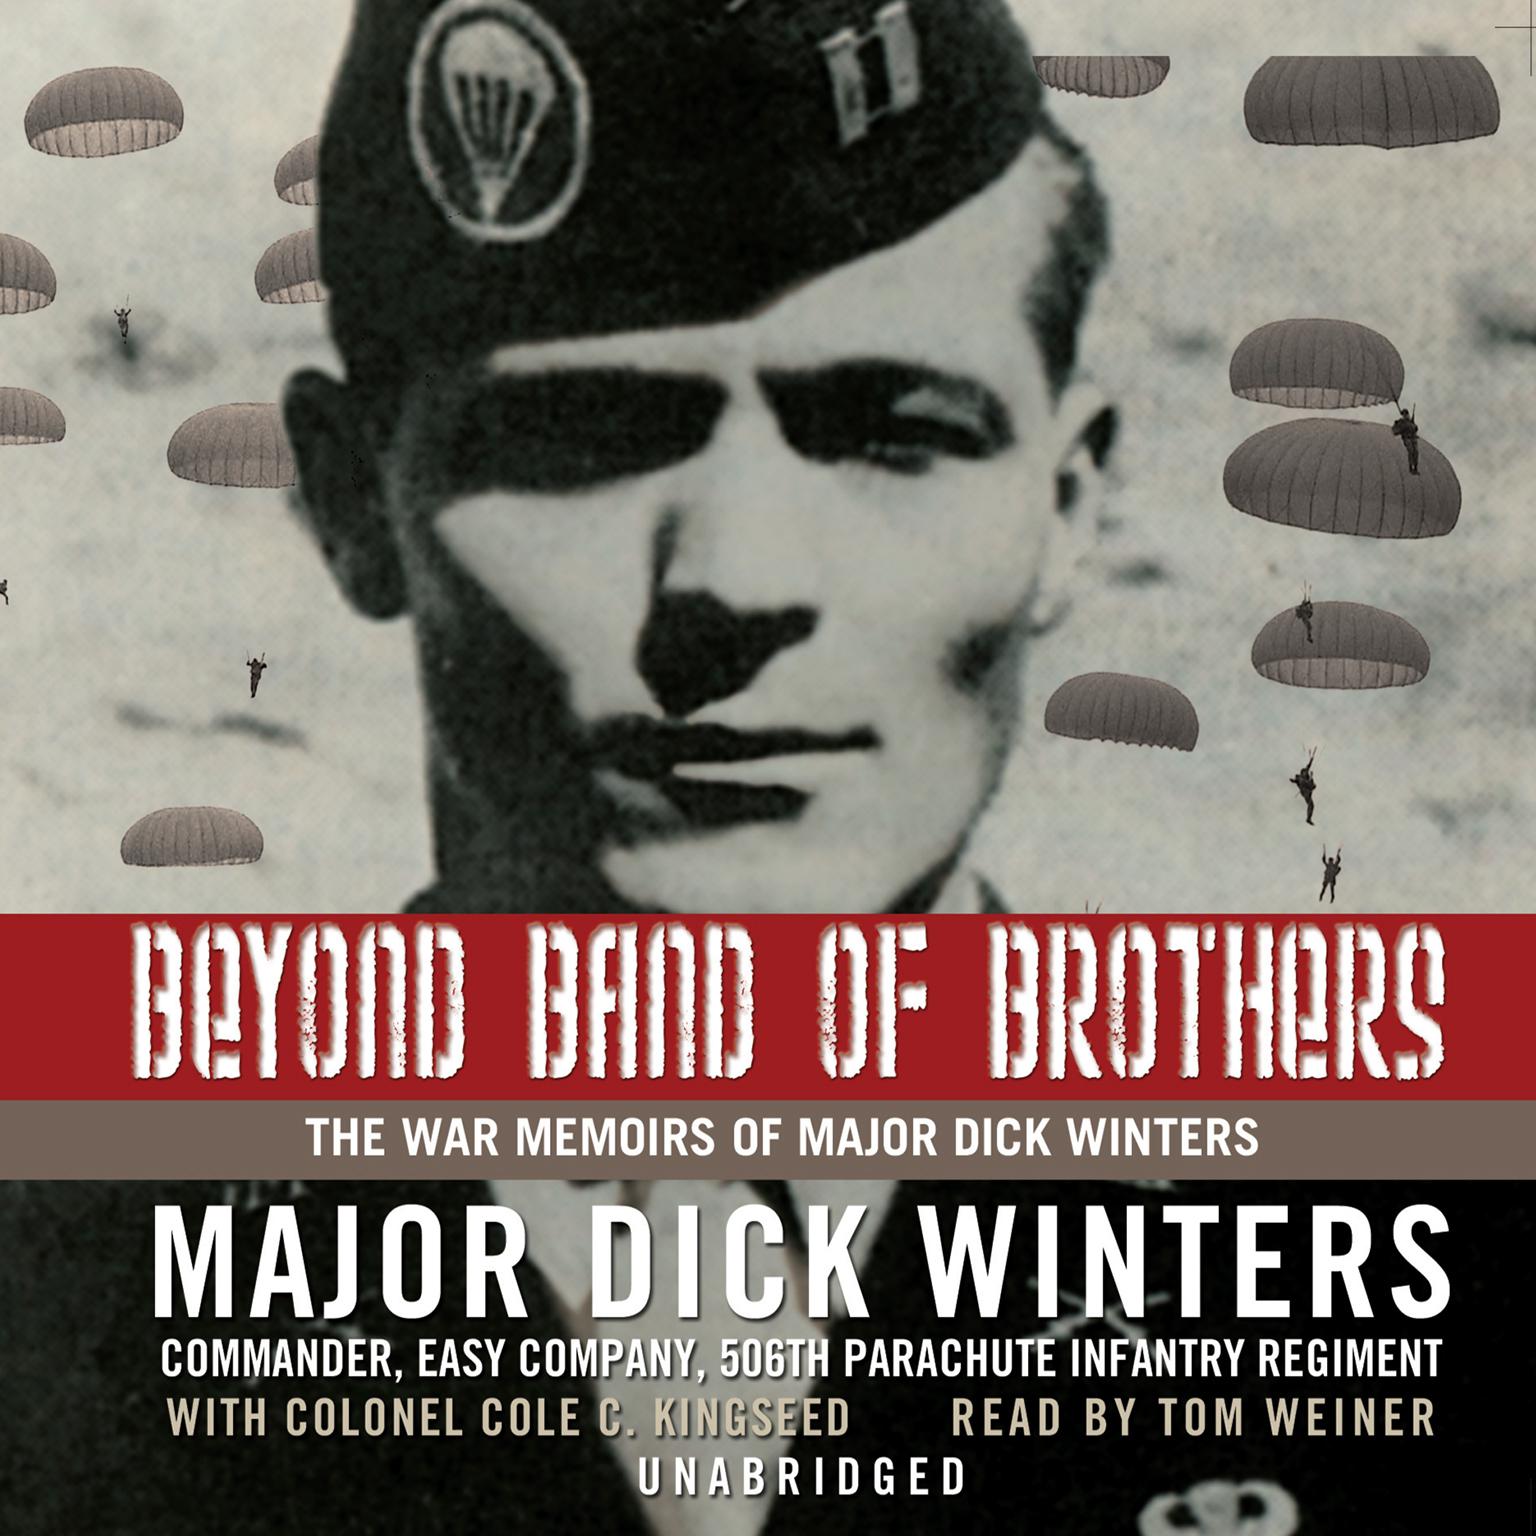 Beyond Band of Brothers: The War Memoirs of Major Dick Winters Audiobook, by Dick Winters